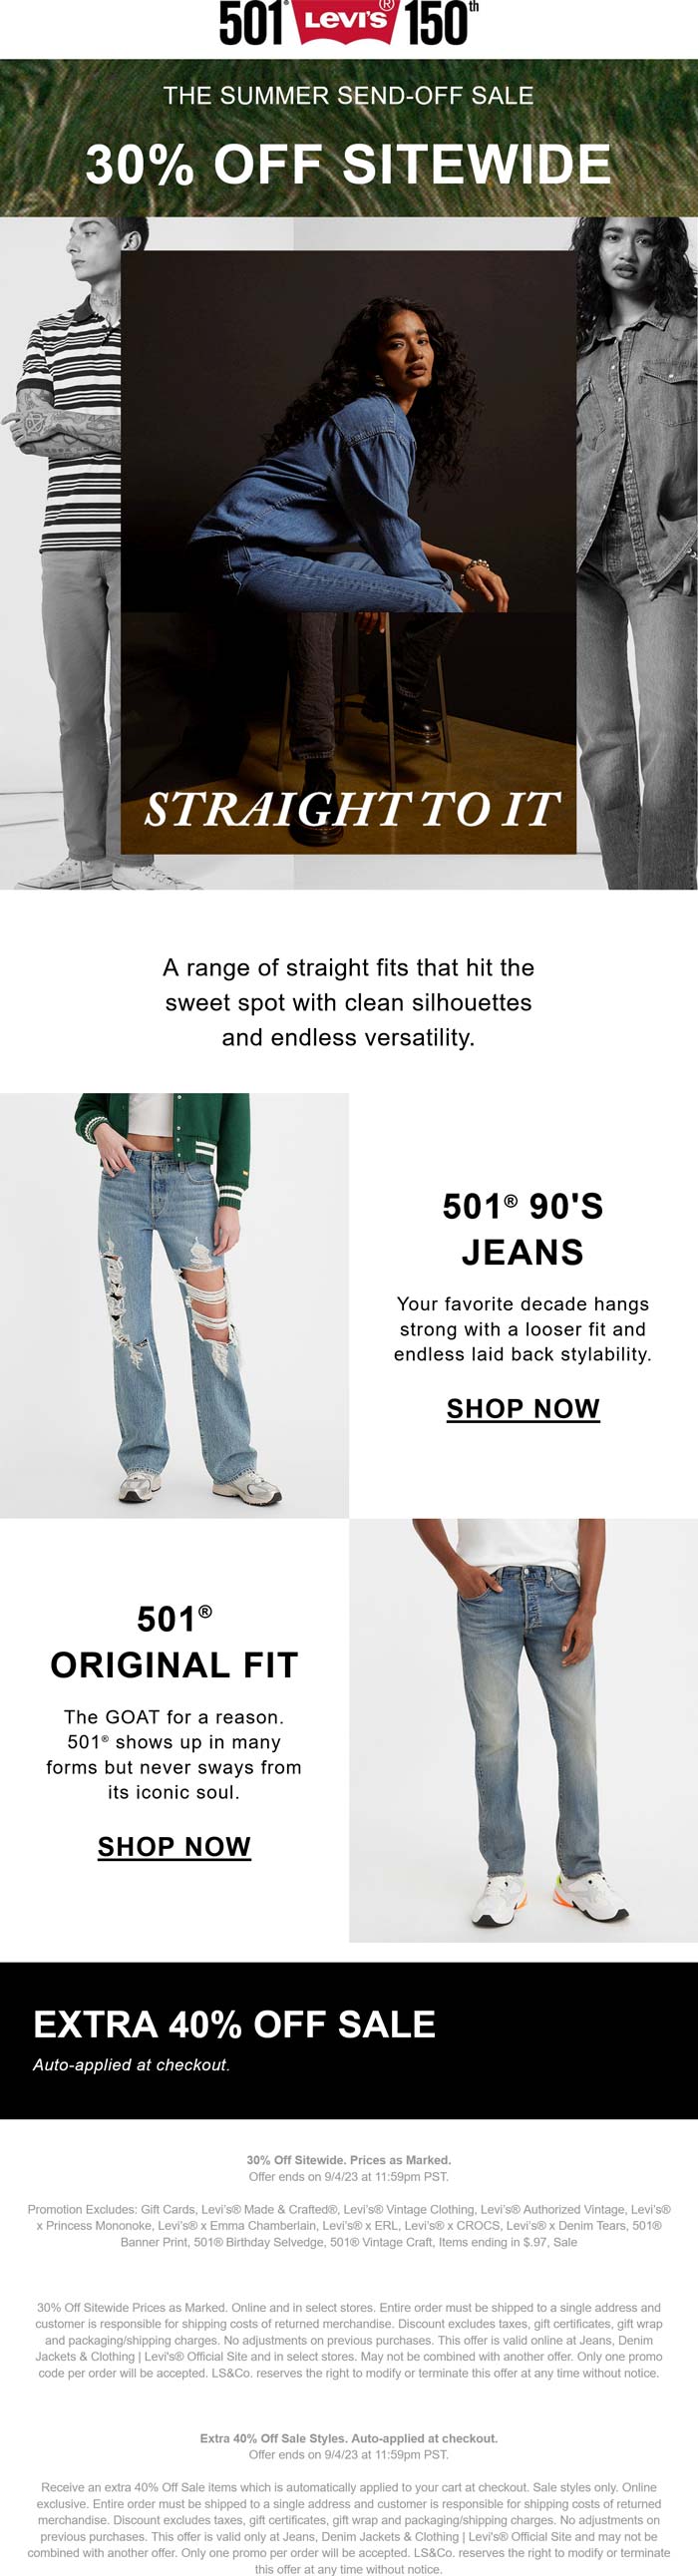 Levis stores Coupon  30% off everything & extra 40% off sale styles at Levis #levis 